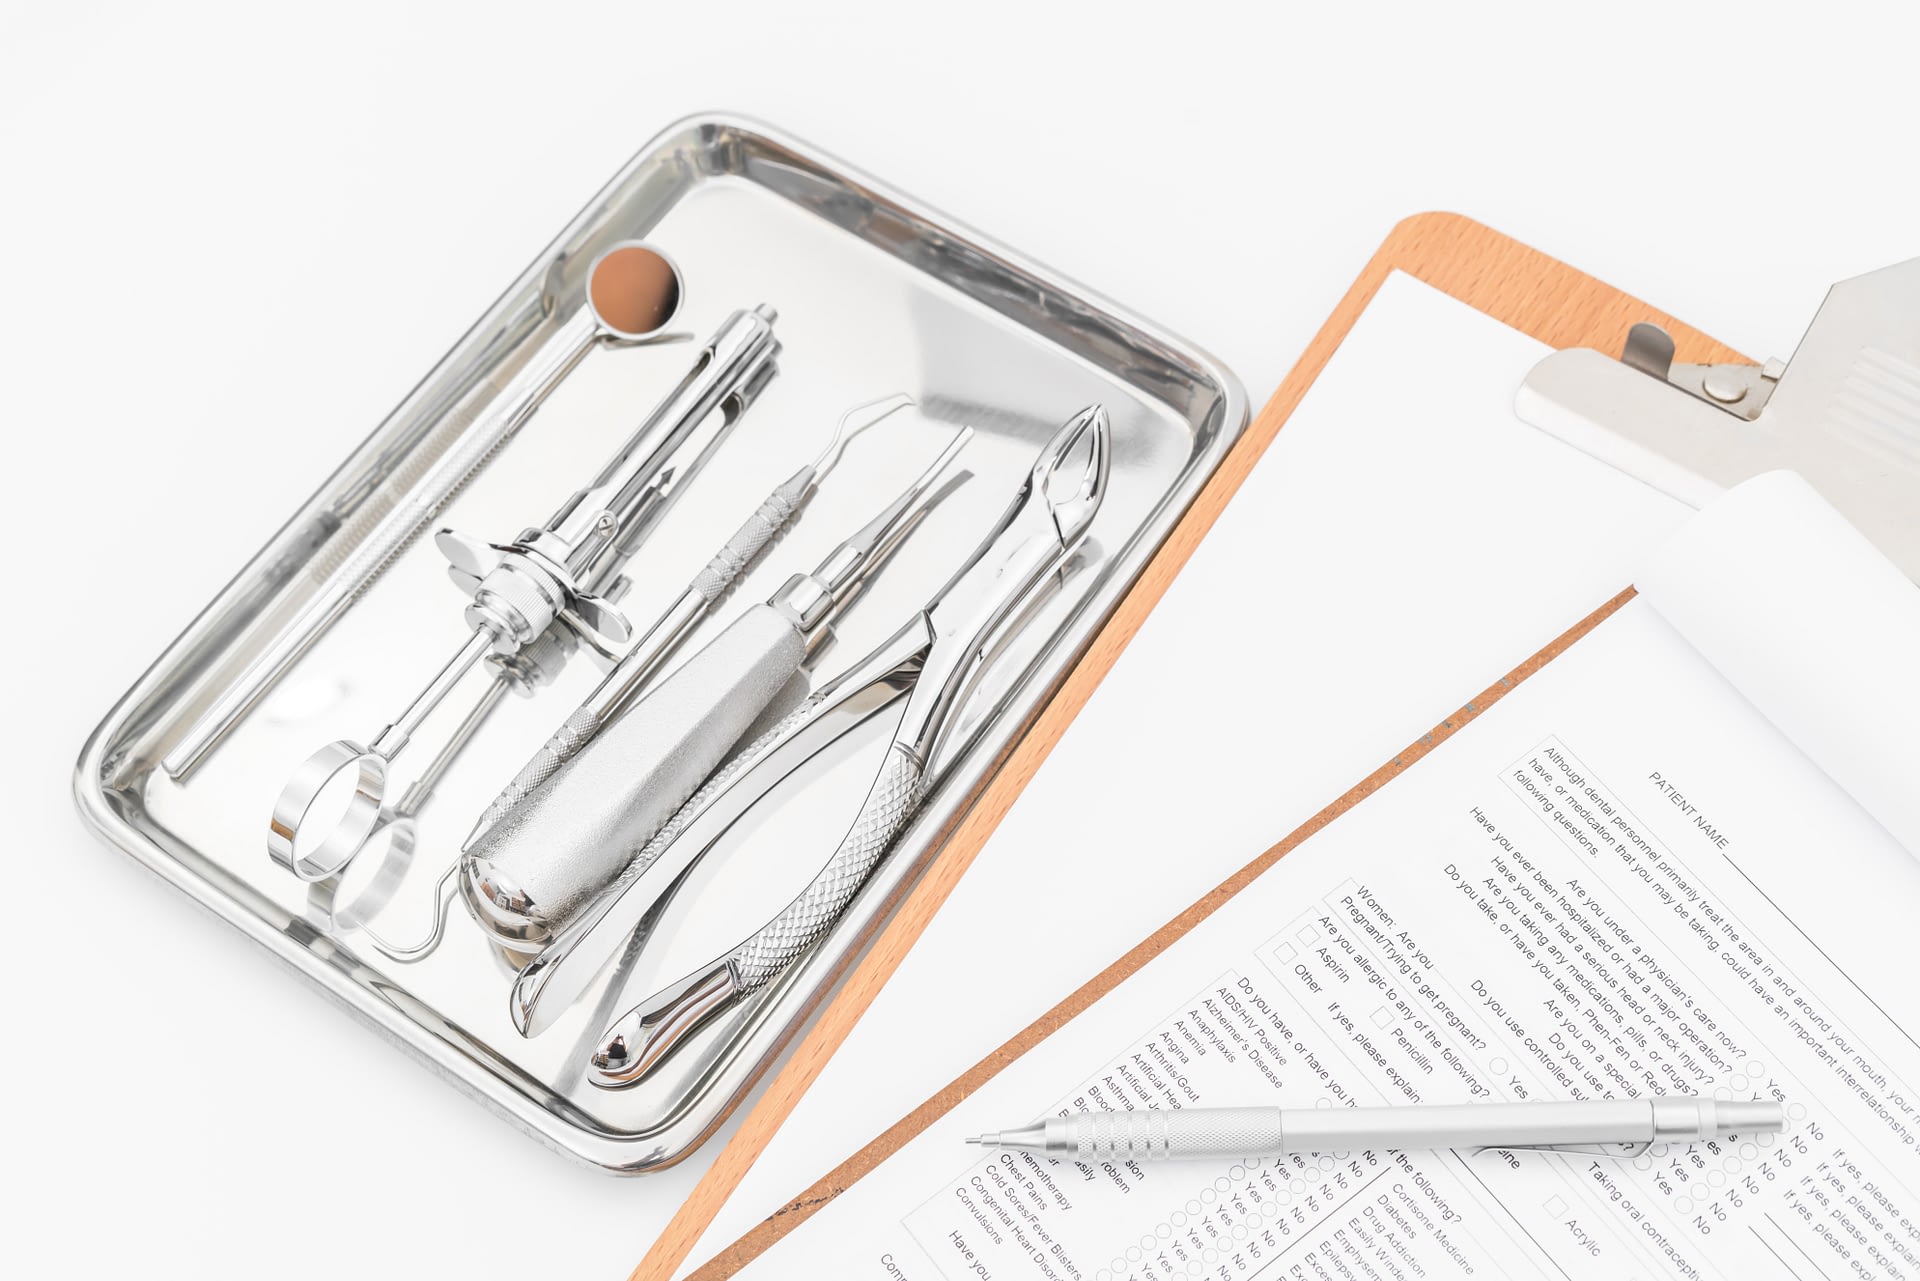 Dental tools, equipment and dental chart on white background.